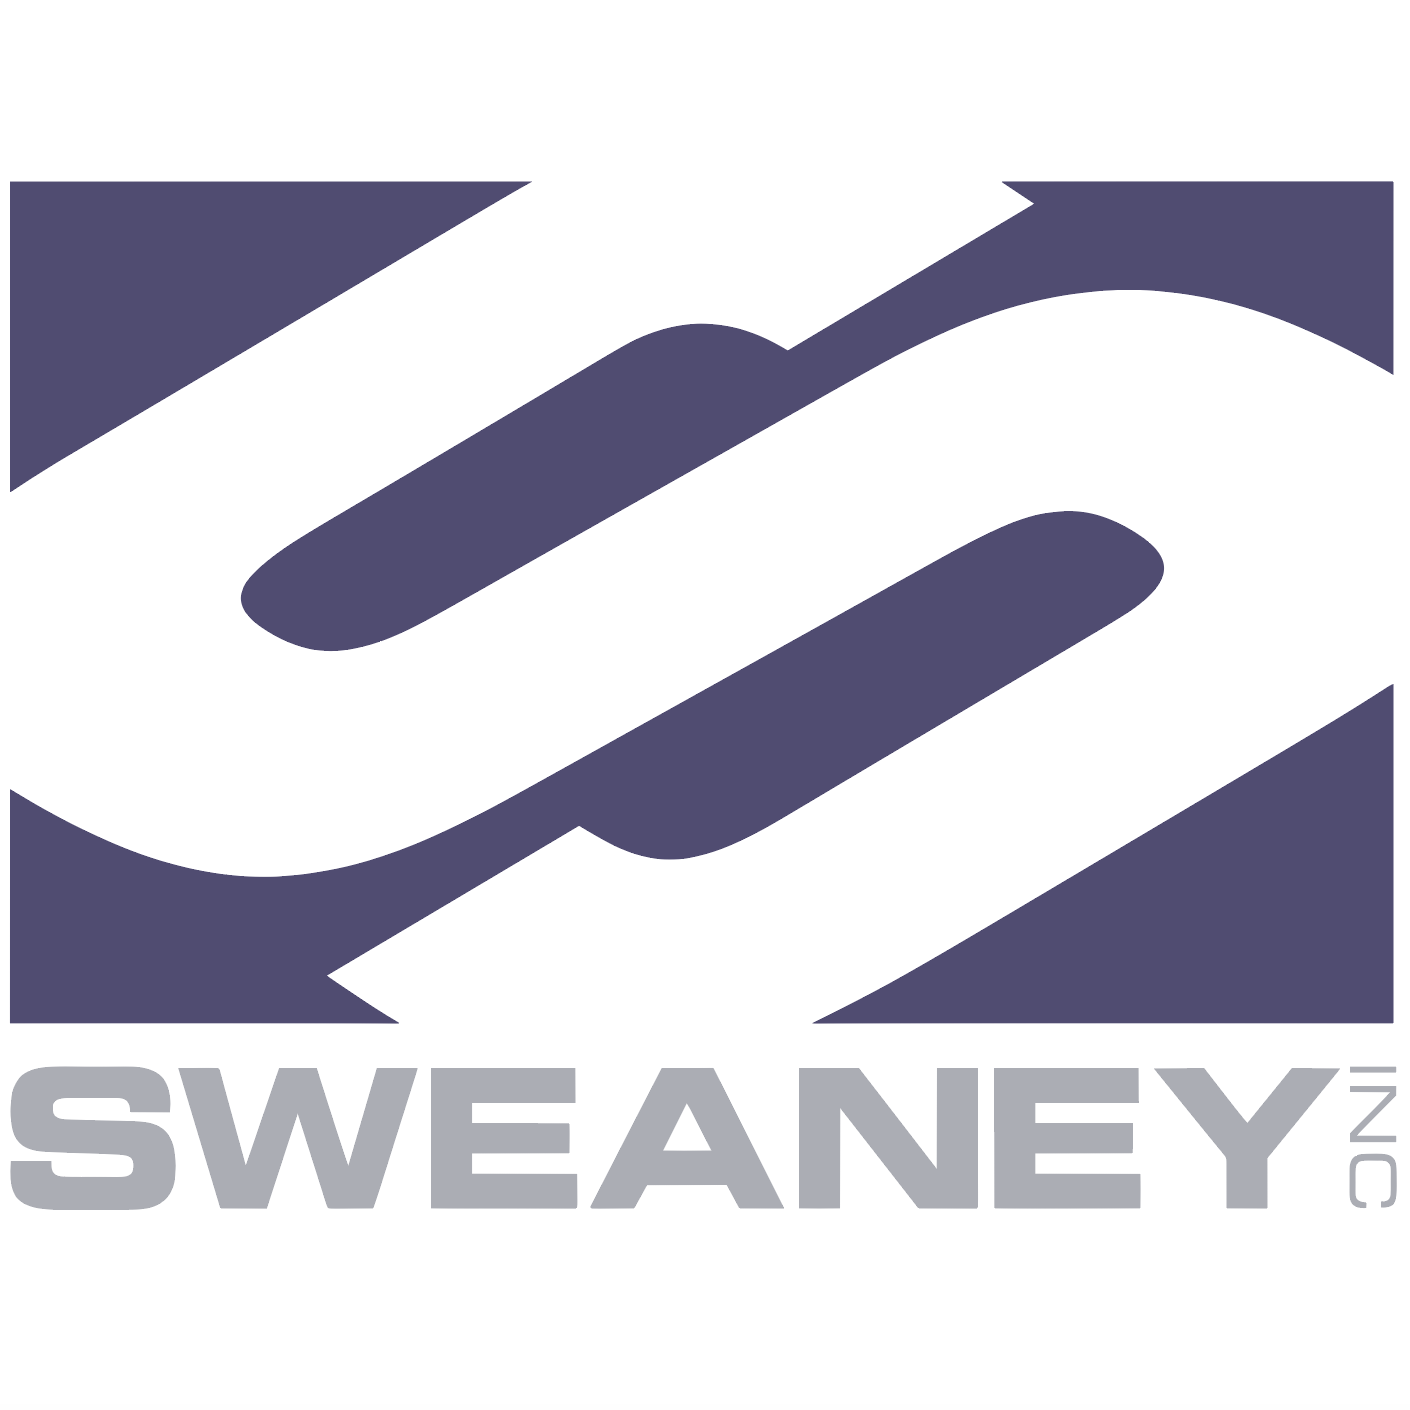 Sweaney Painting & Dry Wall - Bakersfield, CA 93313 - (661)833-0625 | ShowMeLocal.com